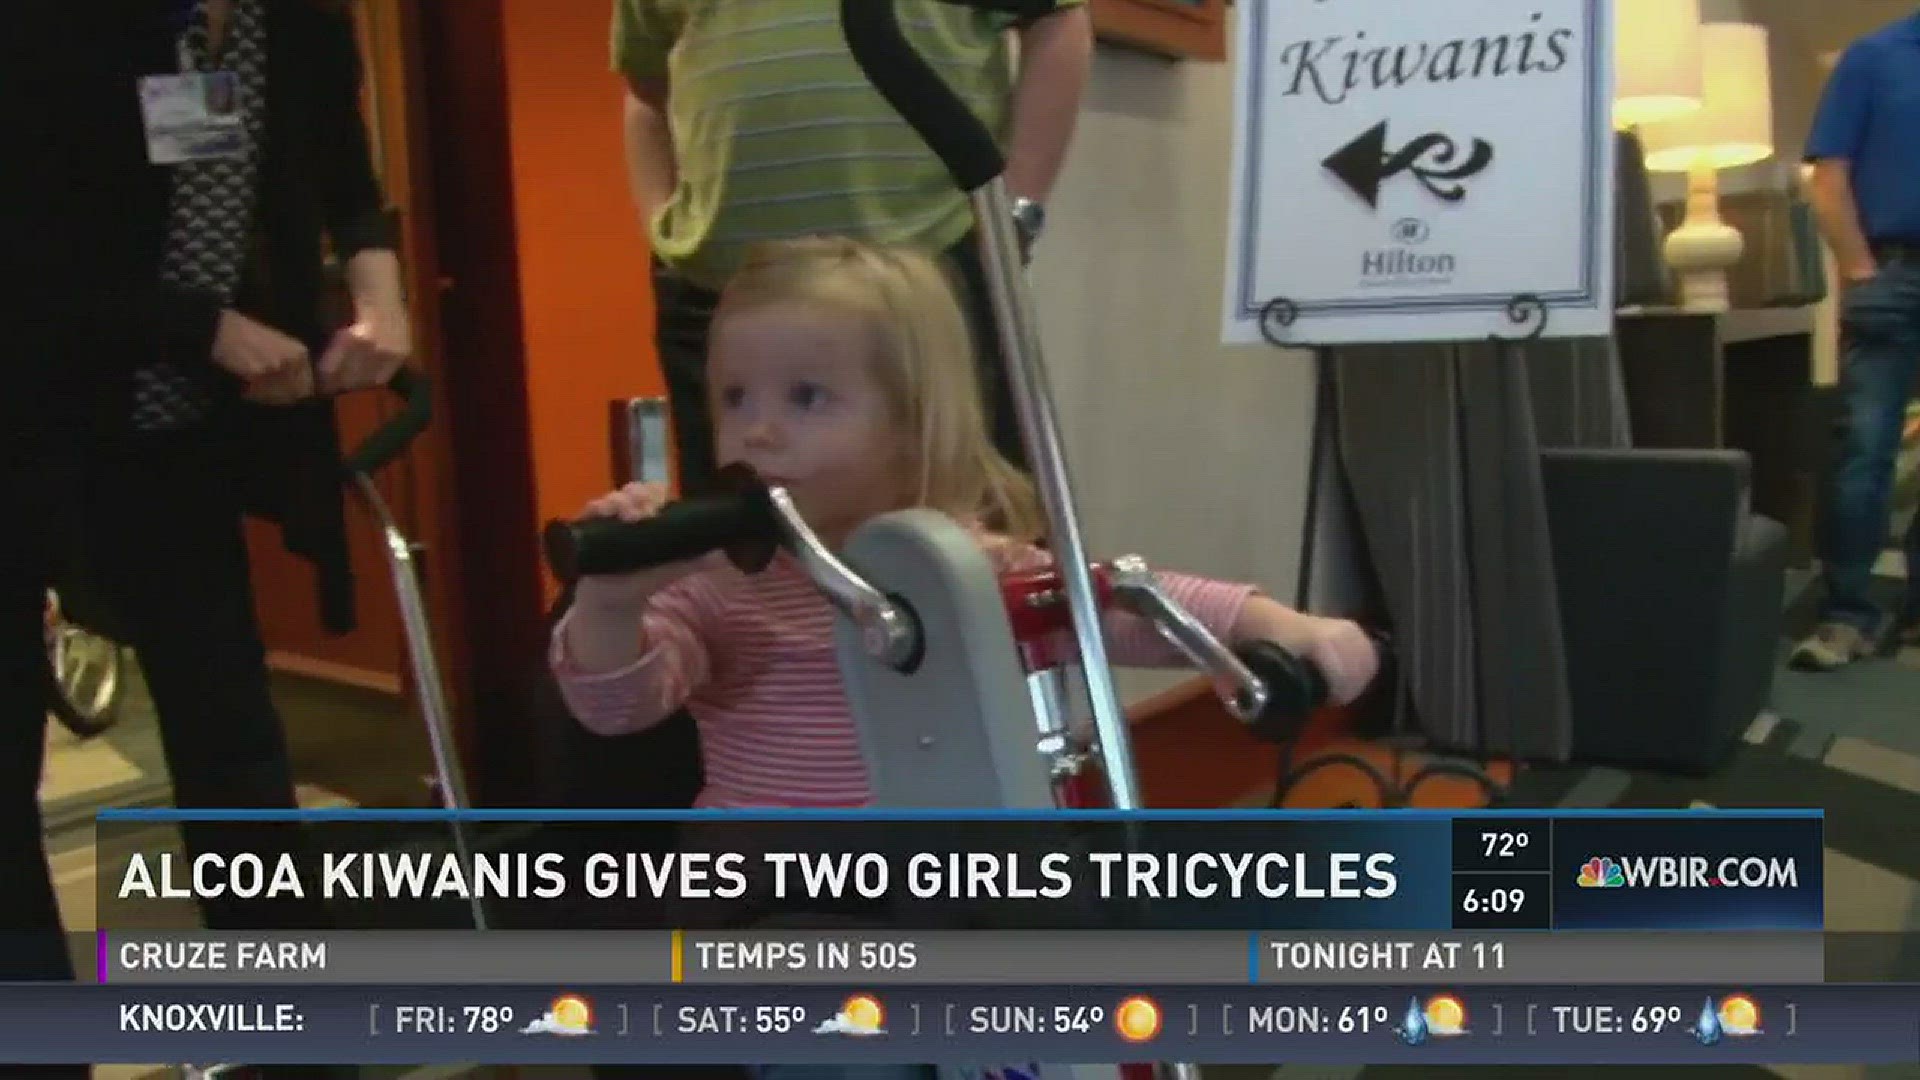 Feb. 23, 2017: Two children have new therapeutic tricycles thanks to the Alcoa Kiwanis Club.